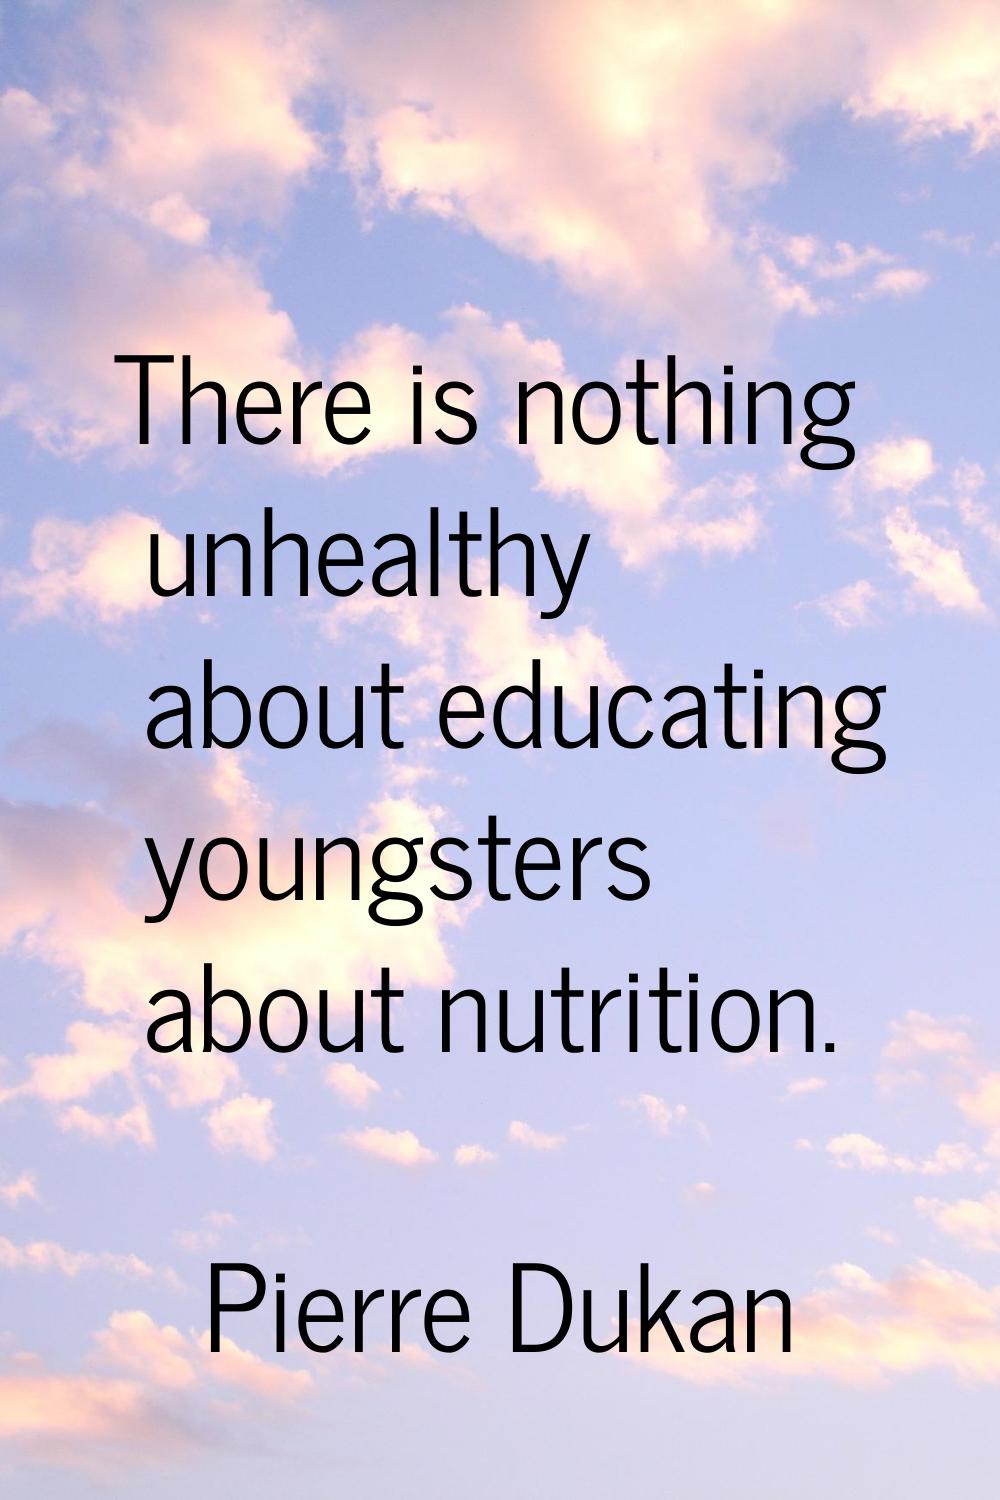 There is nothing unhealthy about educating youngsters about nutrition.